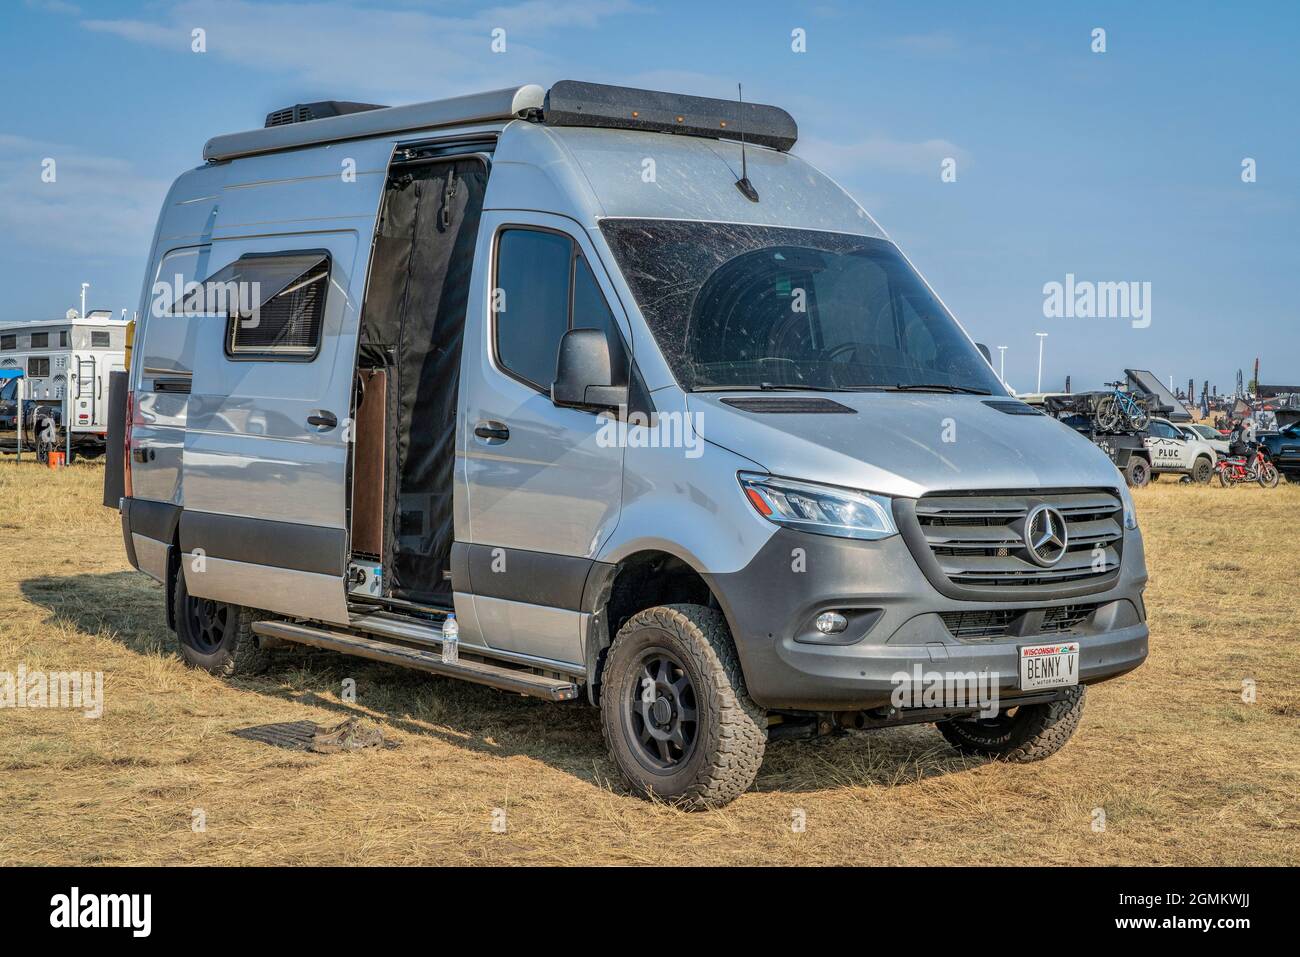 Loveland, CO, USA - August 29, 2021: Winnebago Revel camper van on Mercedes  Sprinter chassis at Overland Expo Mountain West Stock Photo - Alamy